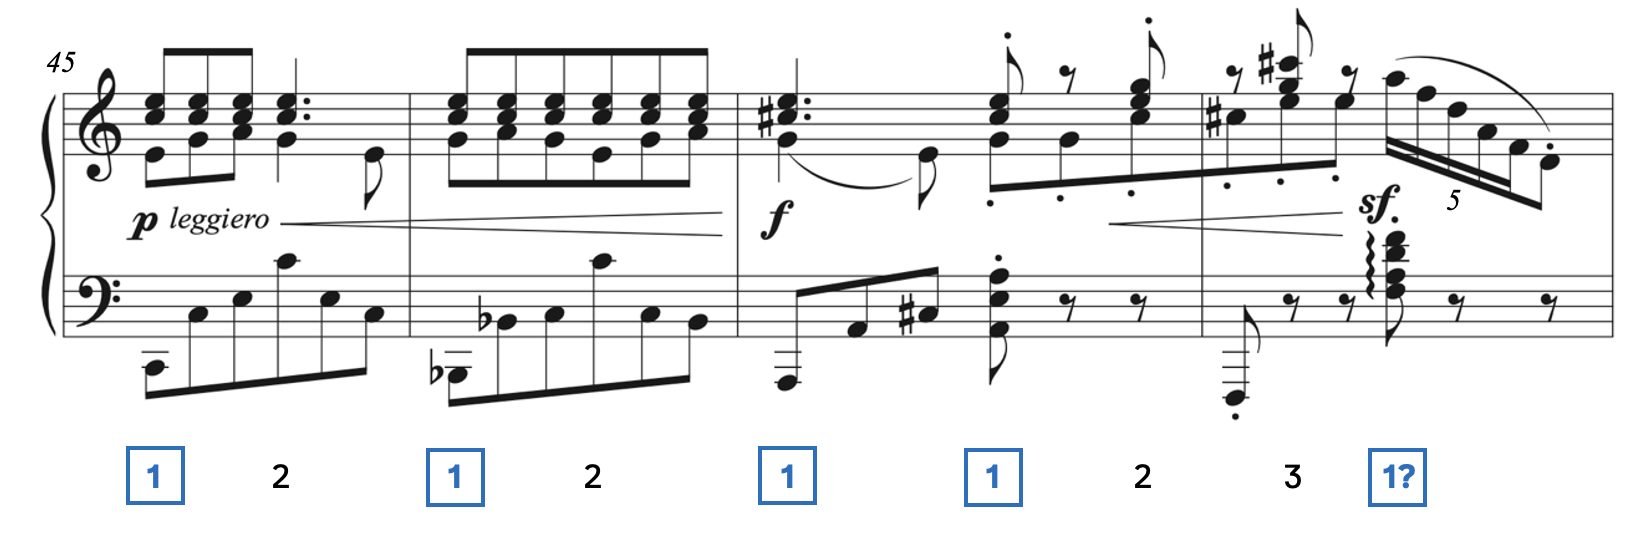 The meter shifts in Brahms's Intermezzo Opus 119 No. 3. There is ambiguity where beats fall.